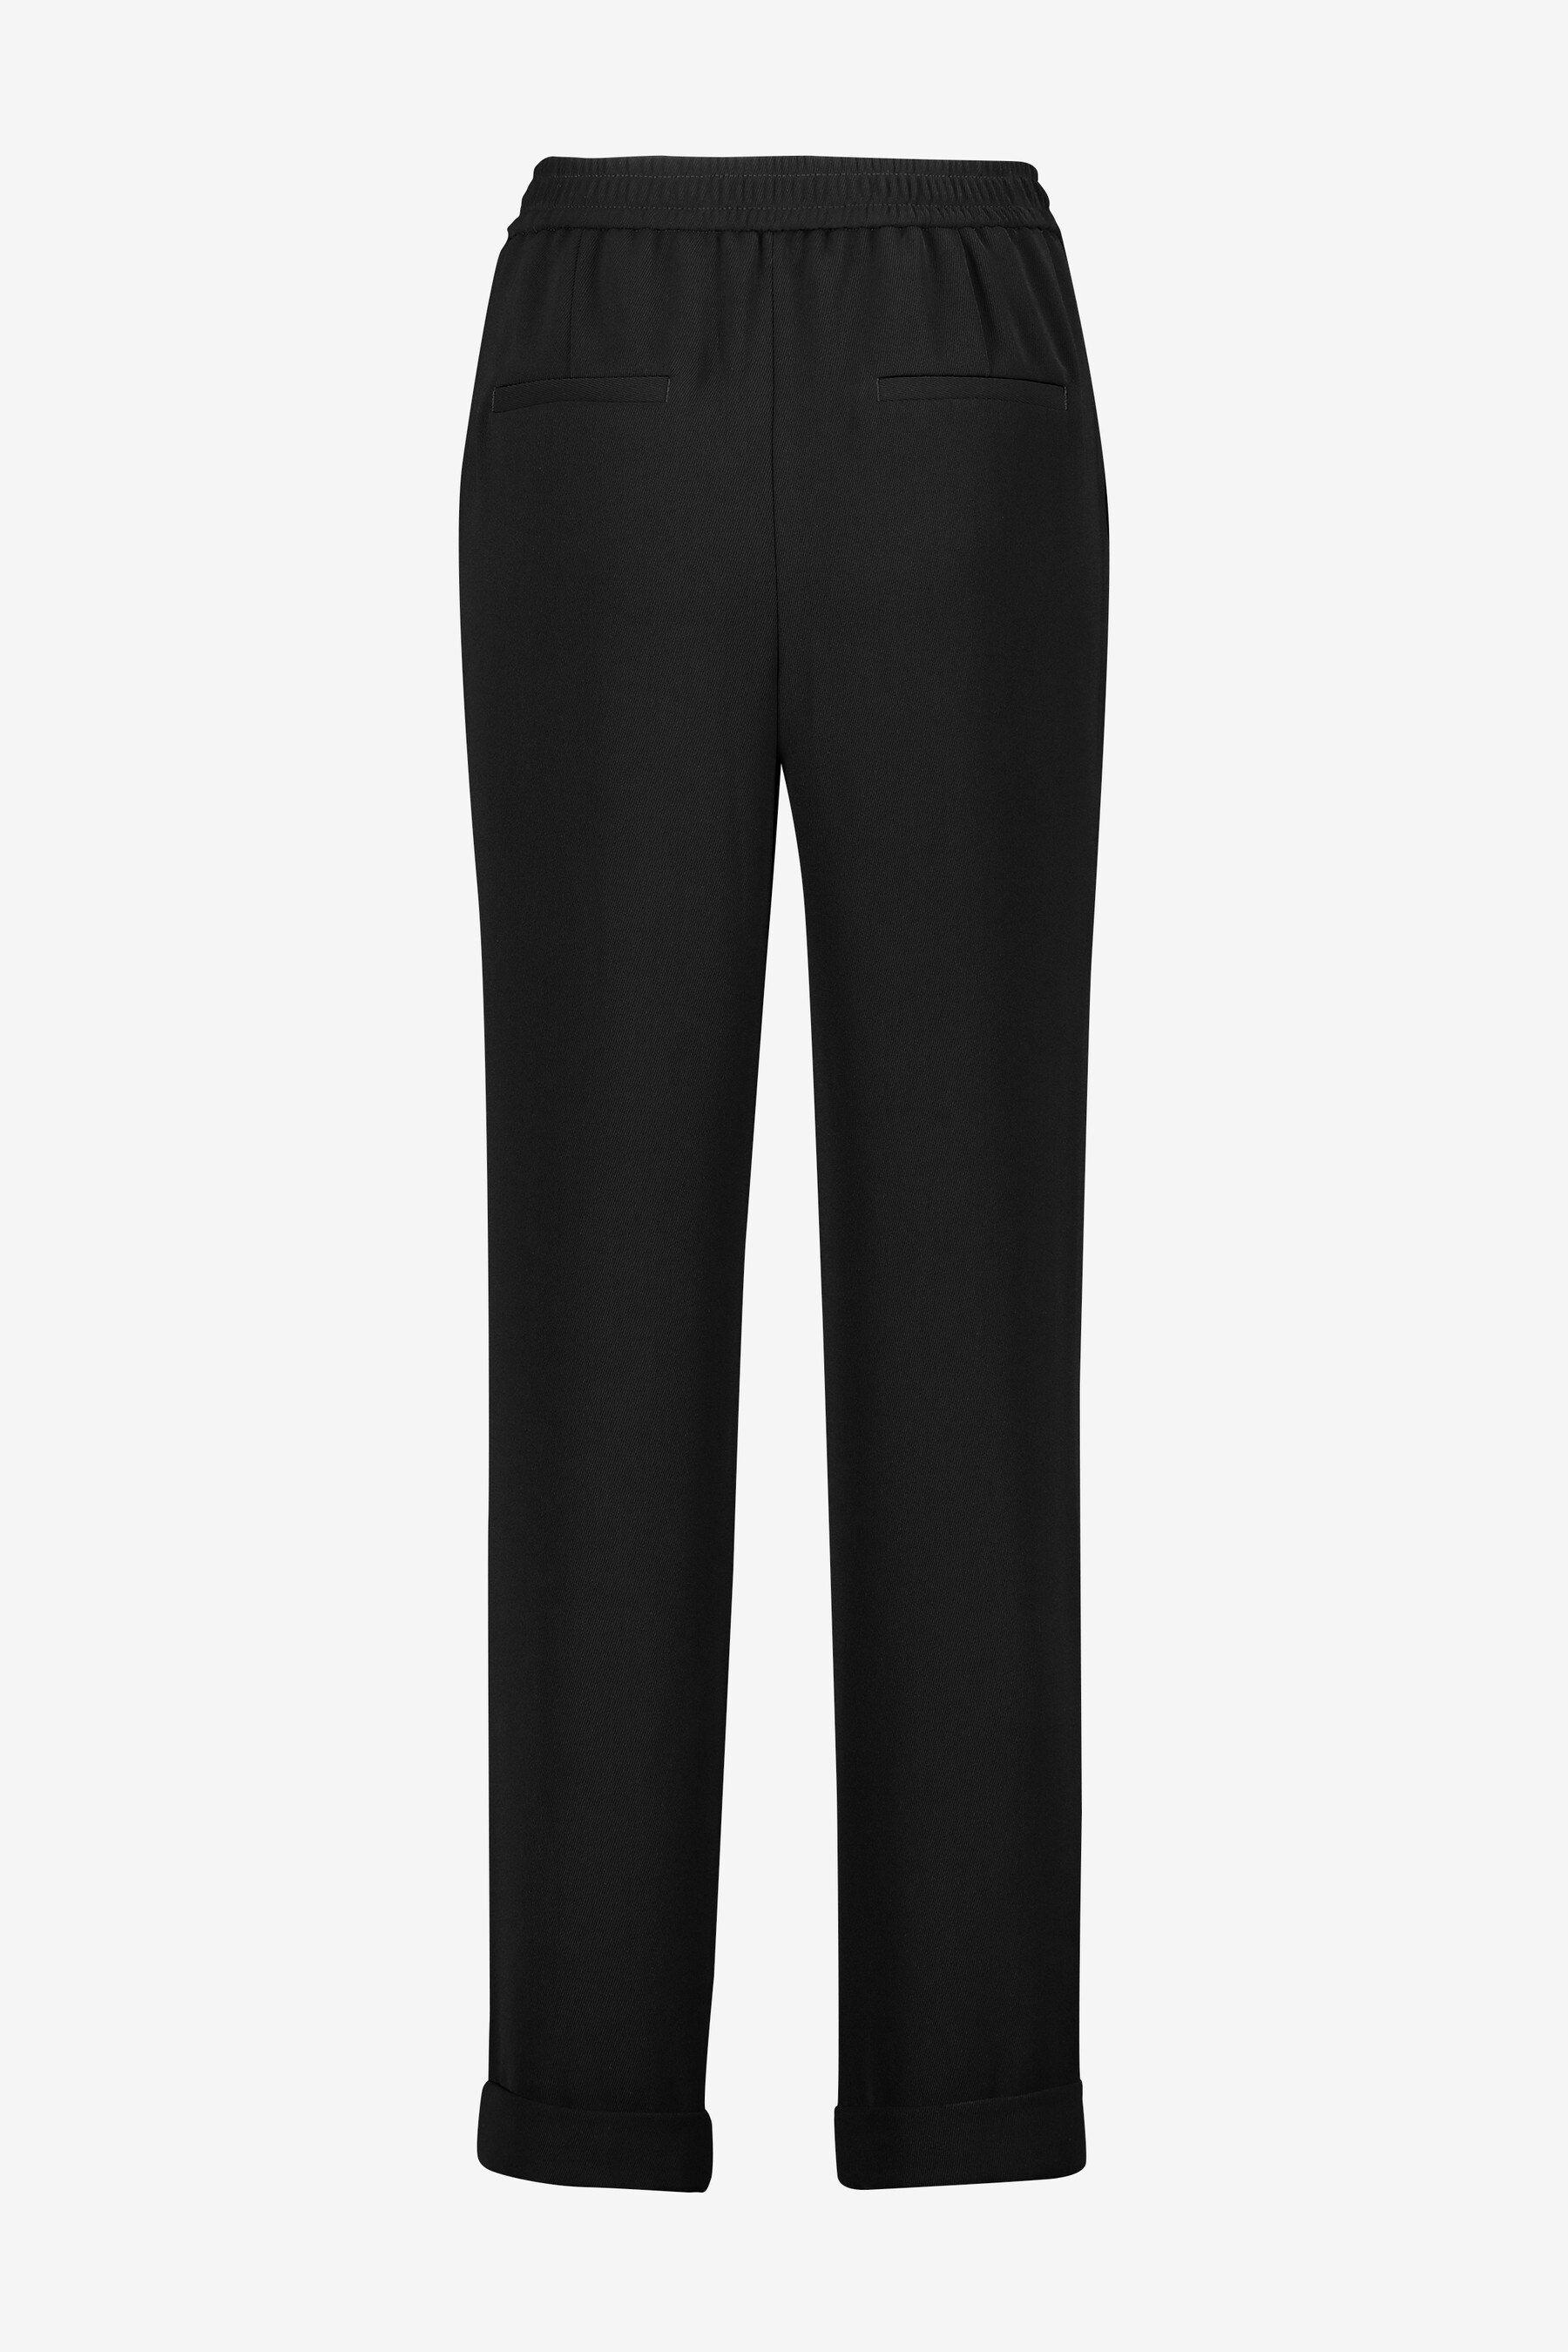 Buy Black Twill Formal Joggers from the Next UK online shop